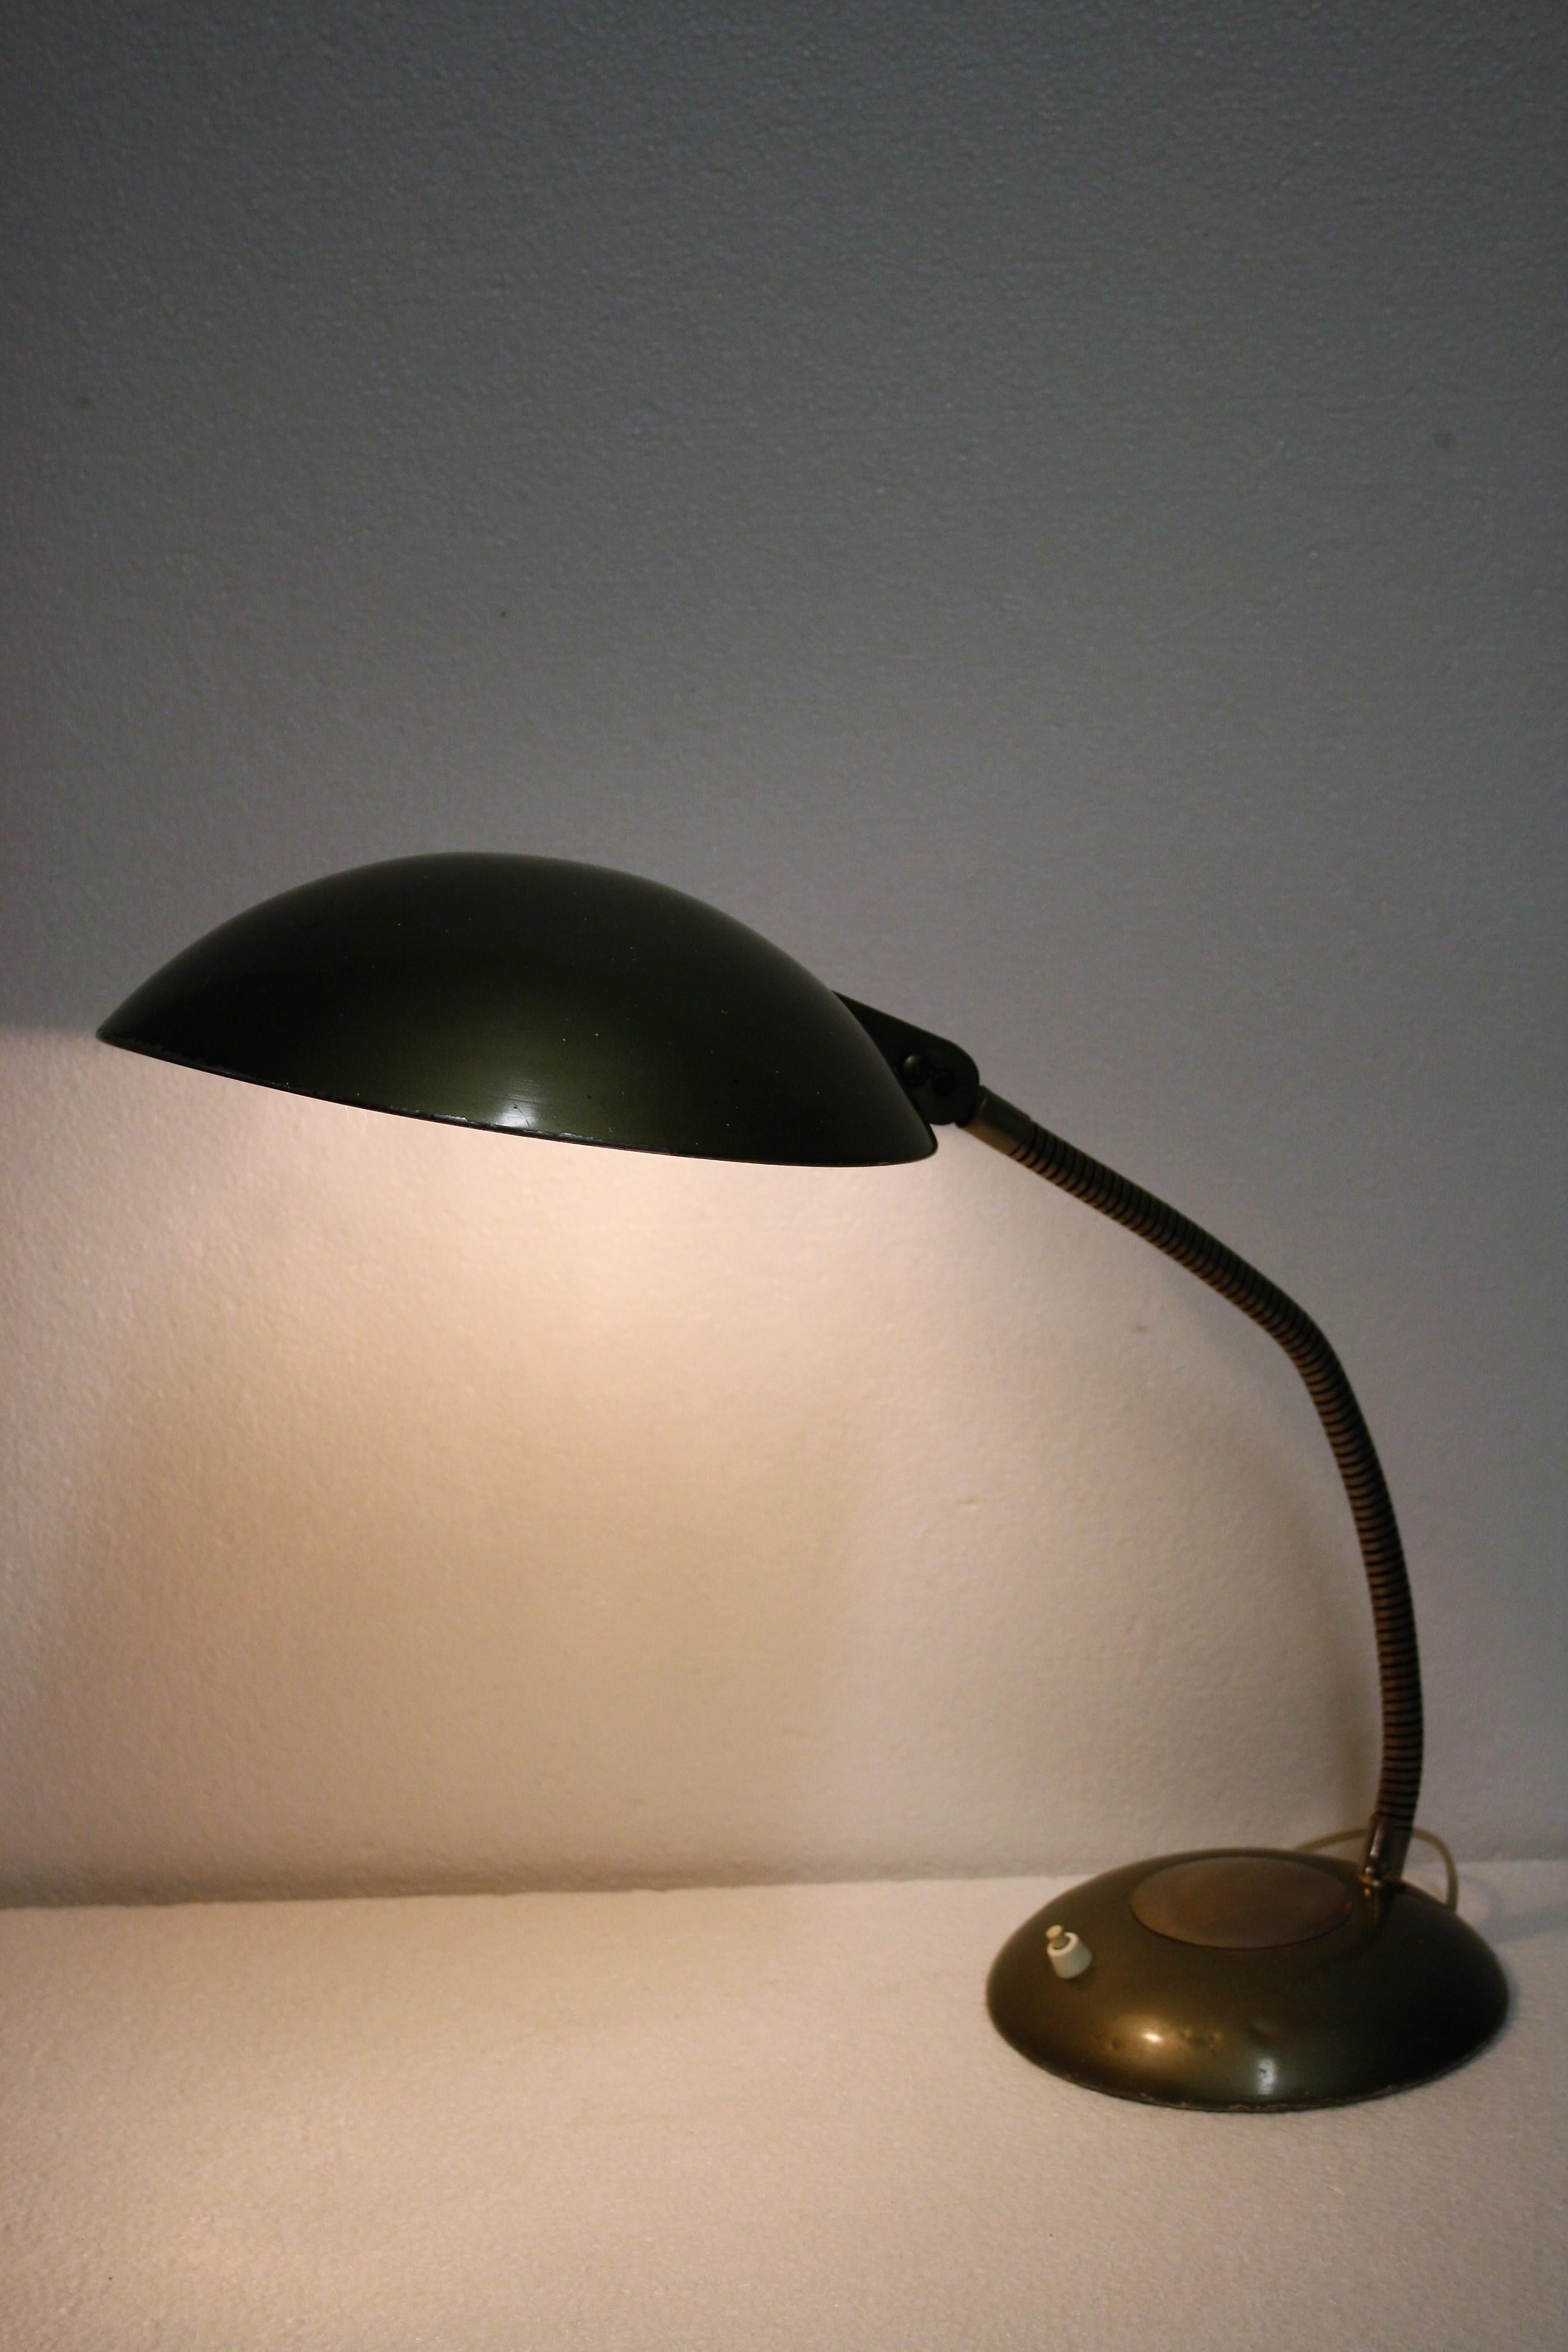 Industrial table lamp manufactured by Erpe.

This flexible desk lamp is made from aluminum and has a green/grey colour.

It is labeled inside the shade.

Erpe is a Belgium company that used to produce lamps in the Art Deco era and in the